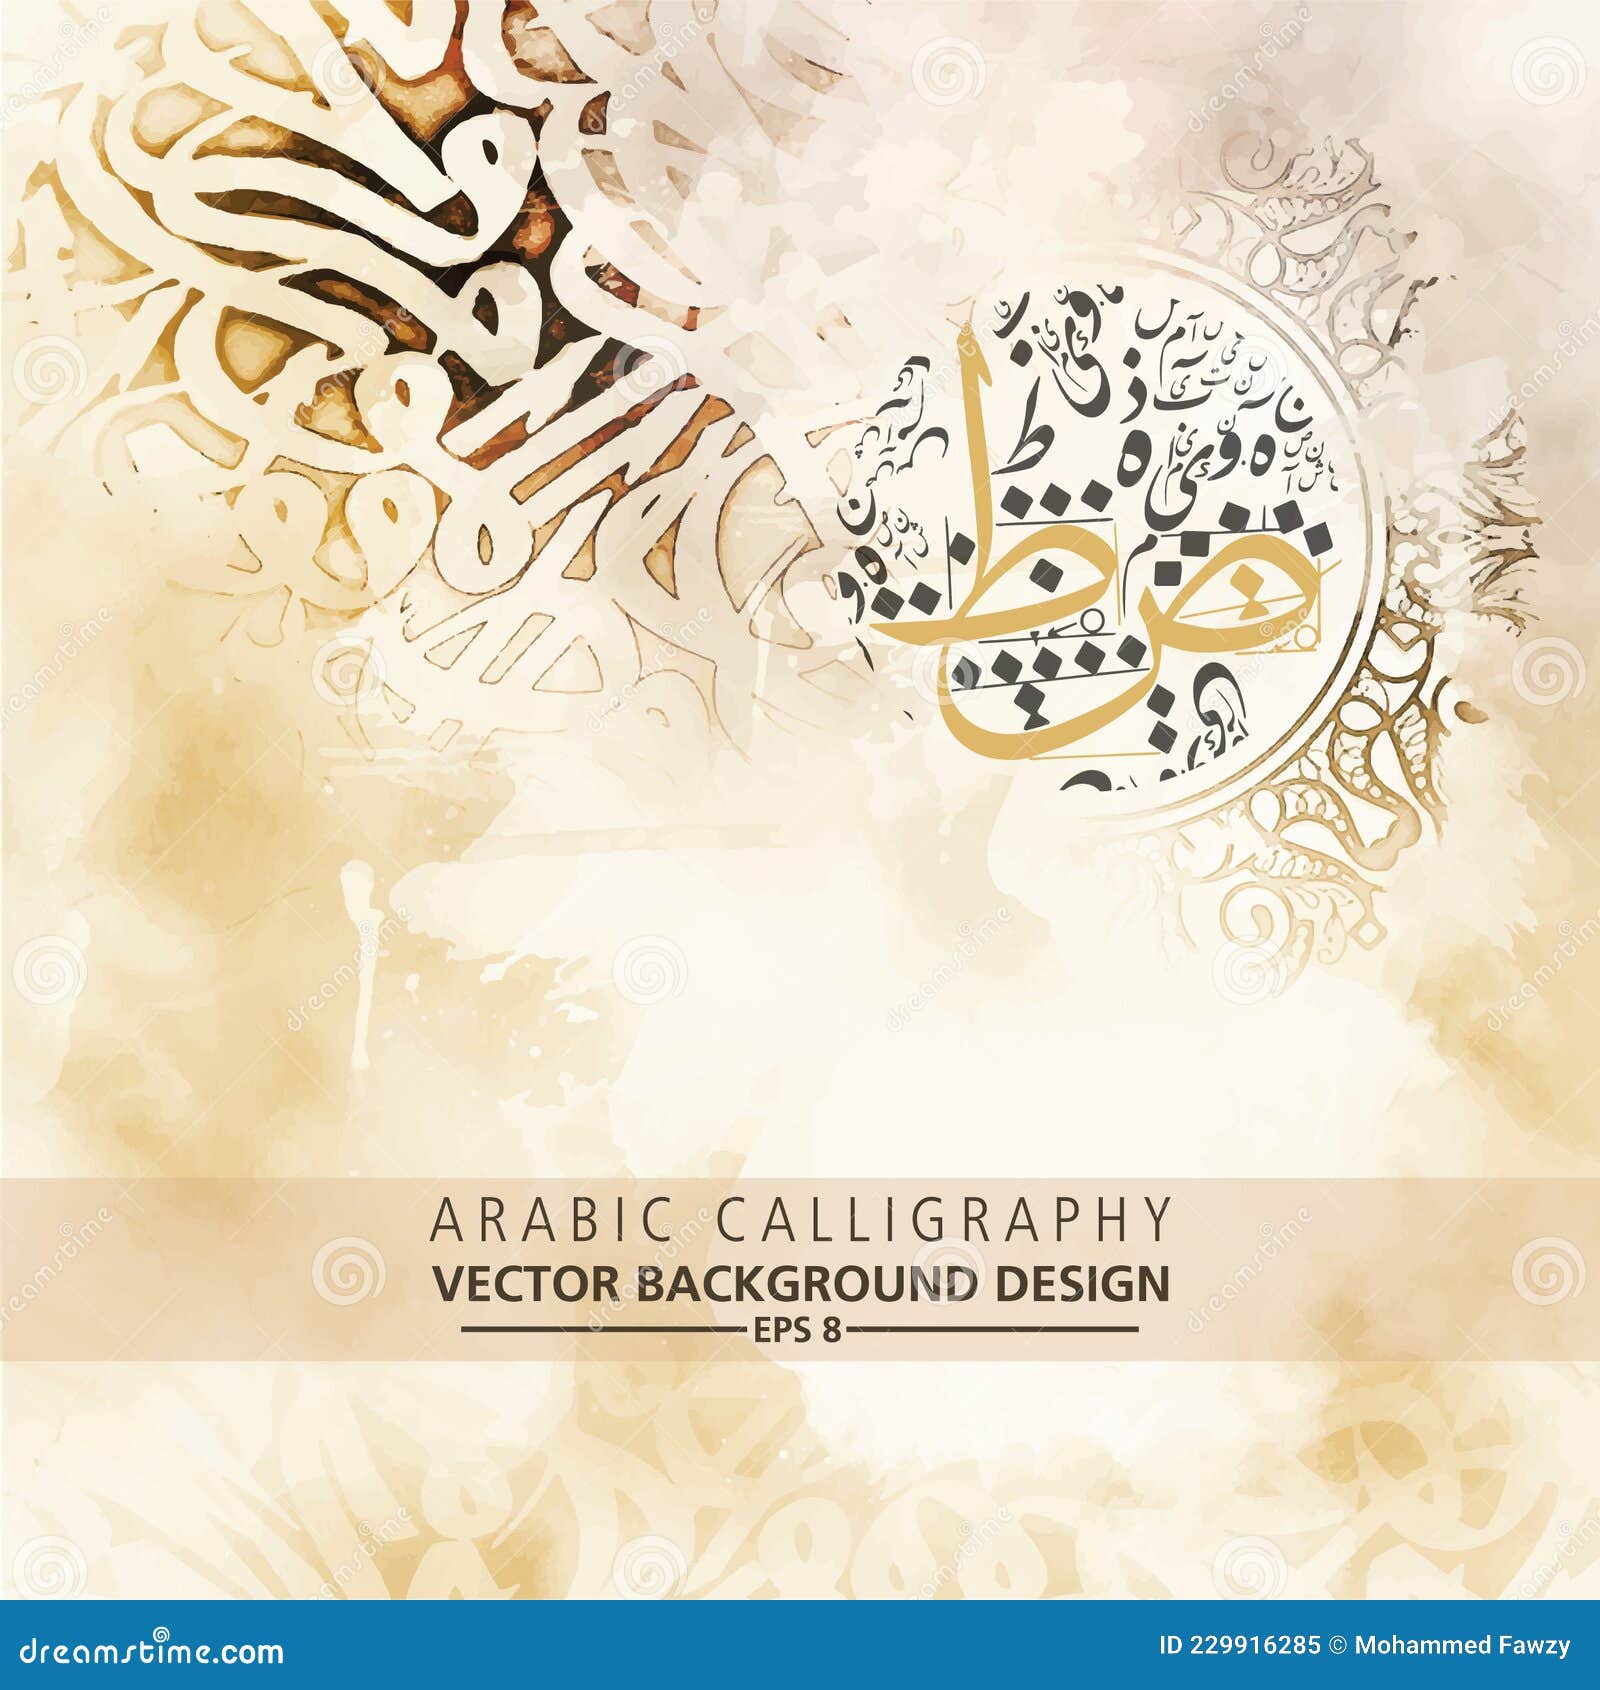 Arabic Calligraphy, Abstract Pattern Sepia. Stock Vector - Illustration of  arab, decoration: 229916285